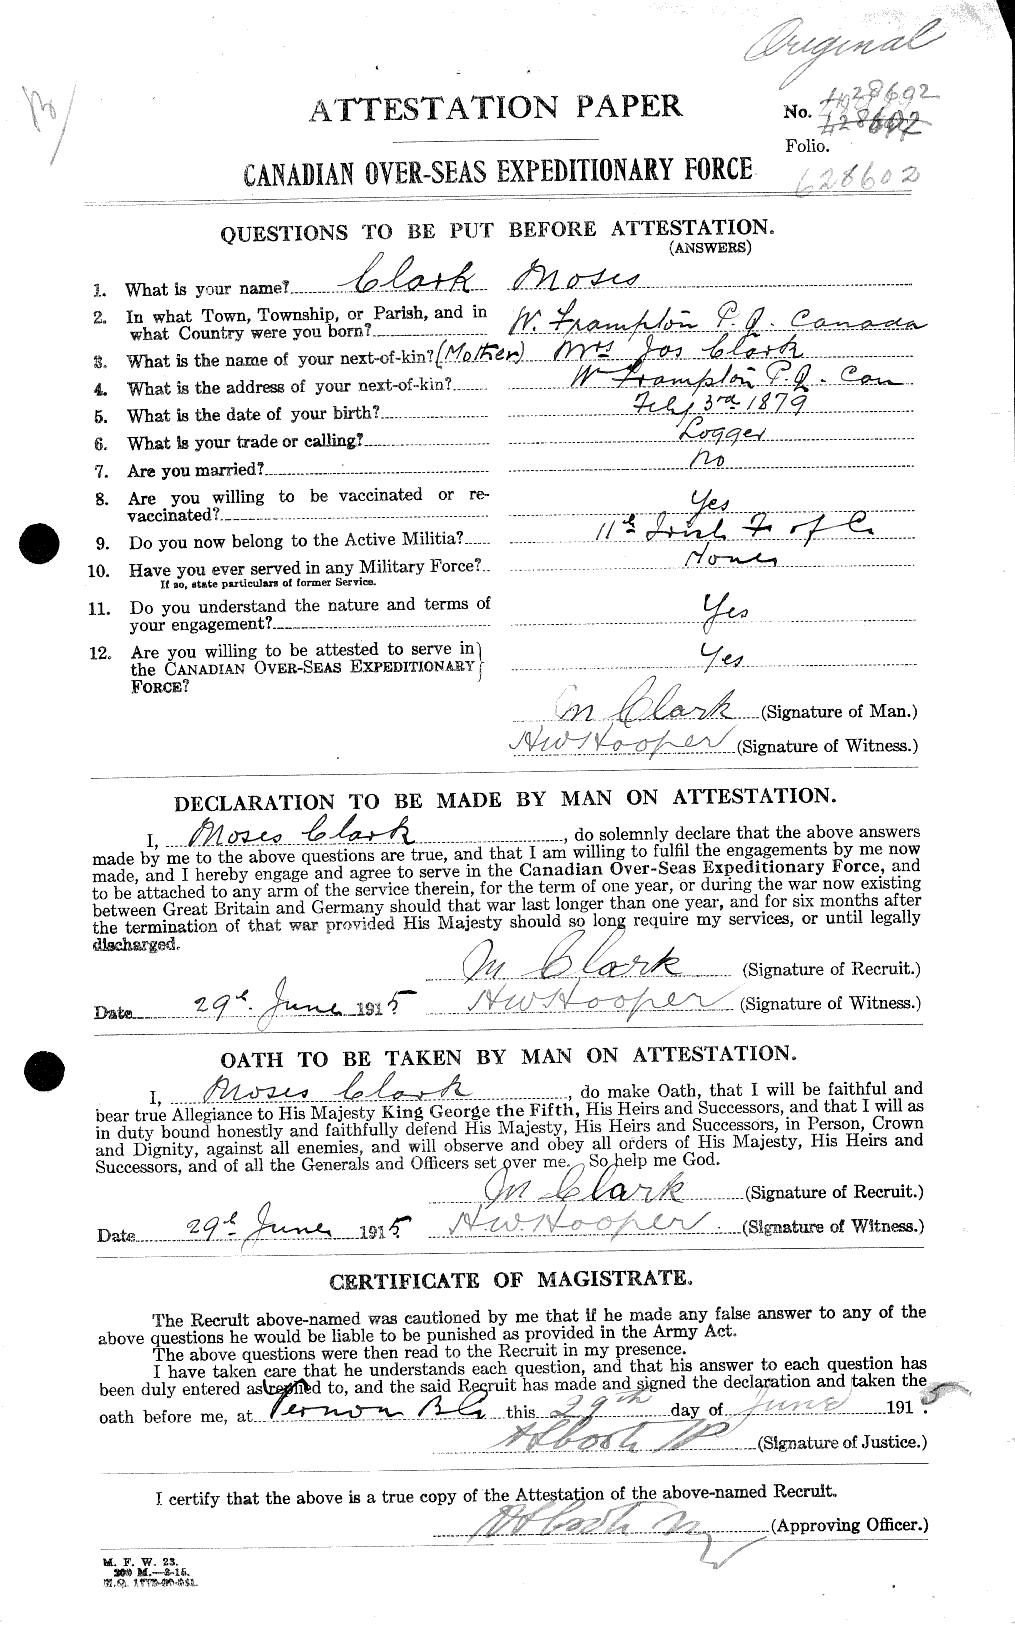 Personnel Records of the First World War - CEF 023453a